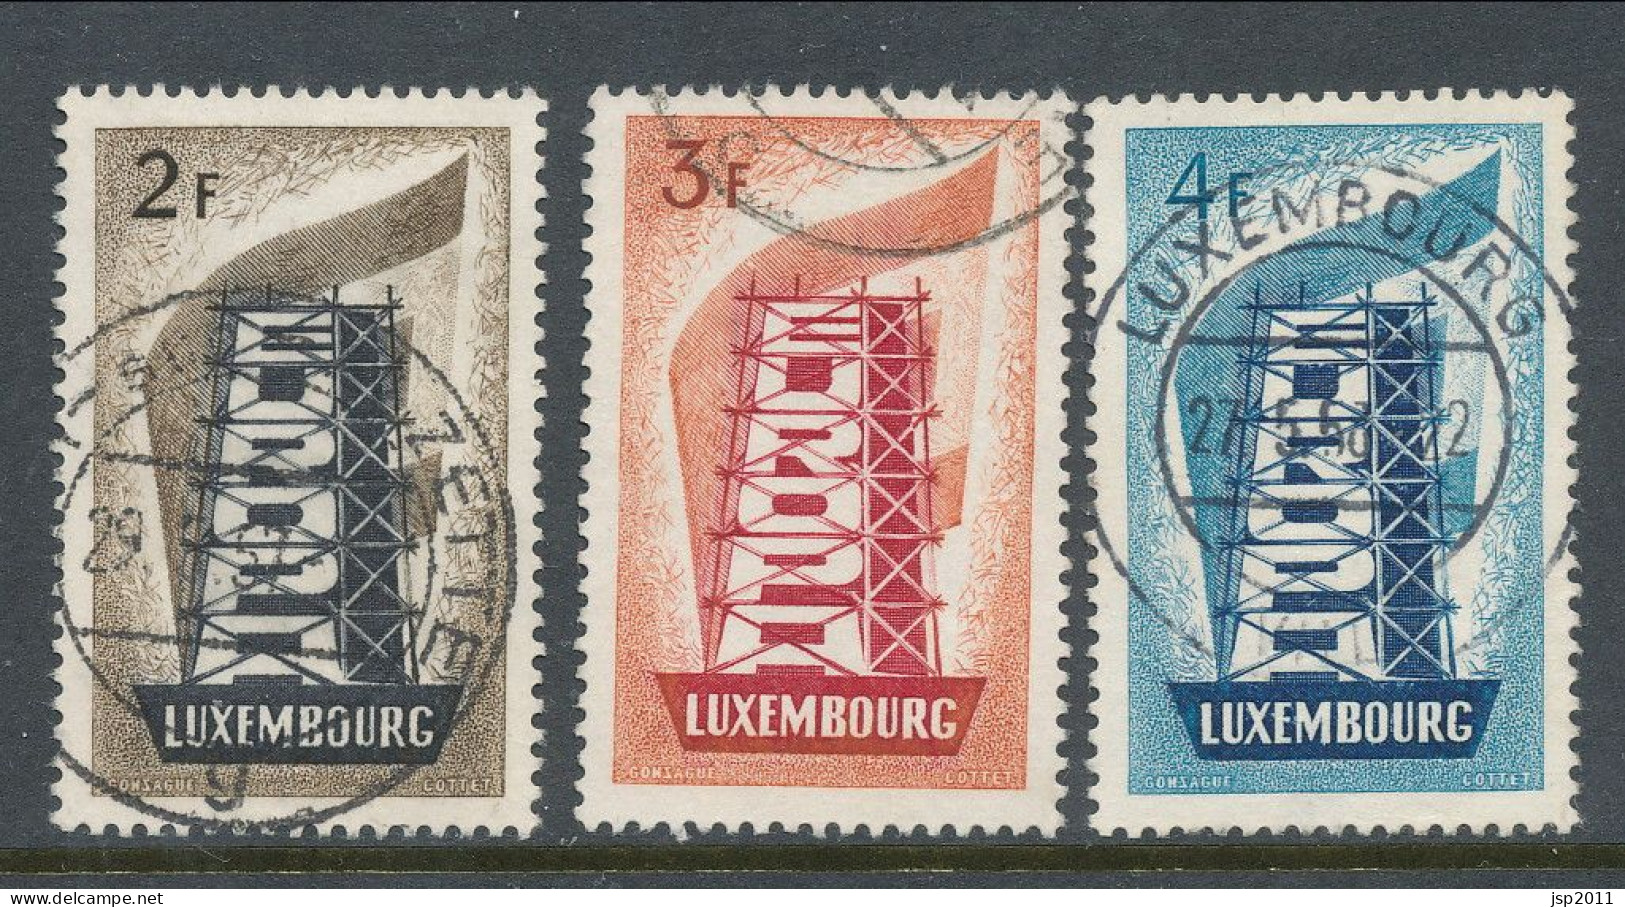 Europa CEPT 1956,  Luxemburg, Cancelled/Used - 1956